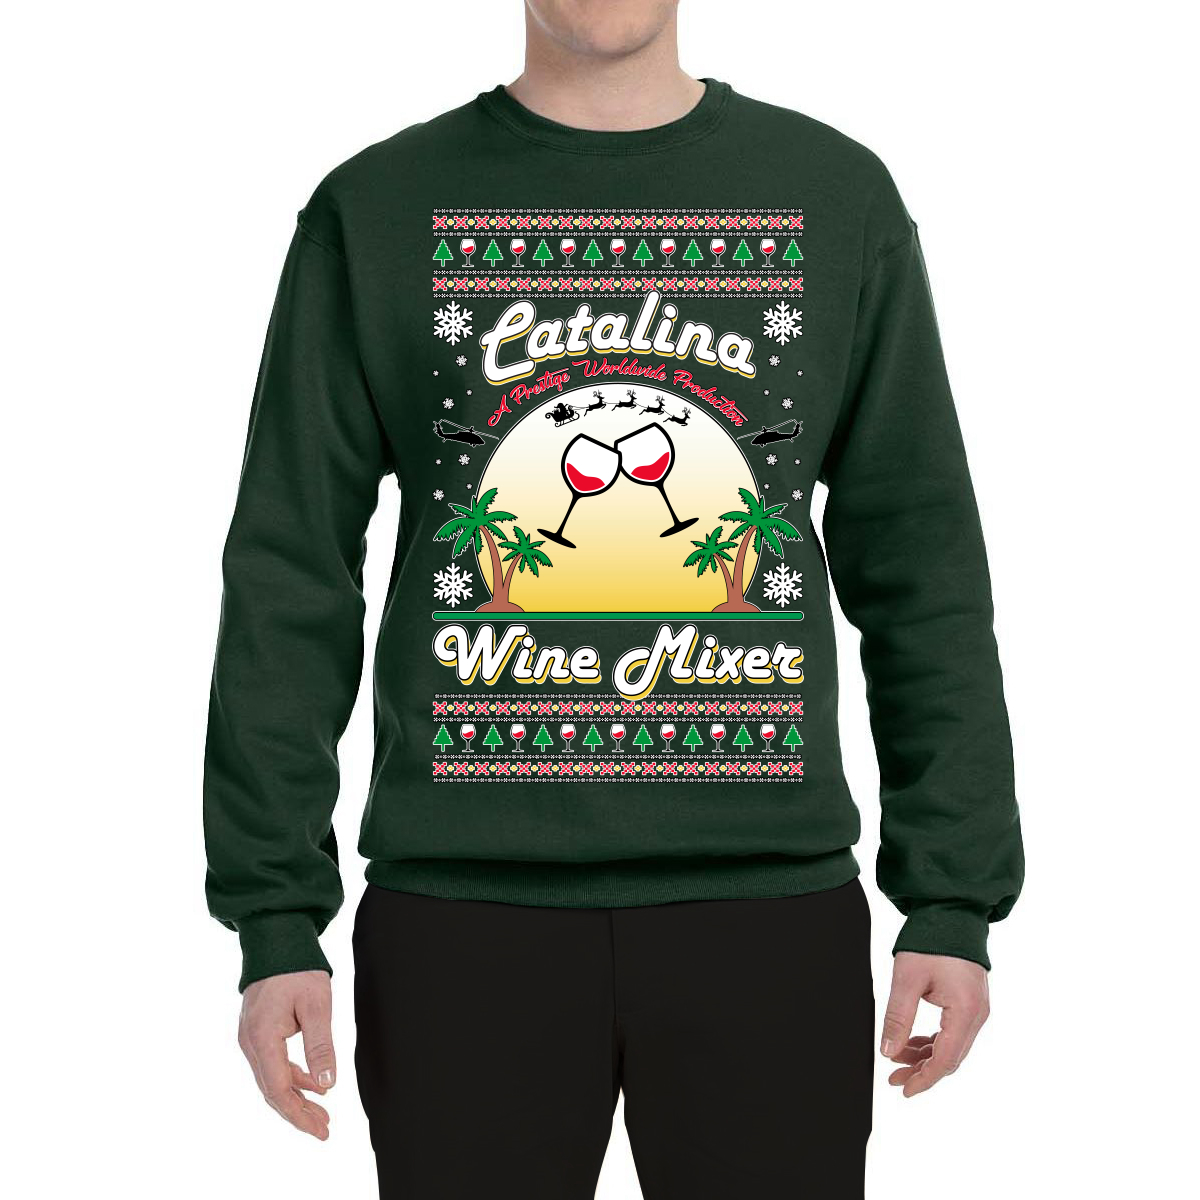 Wild Bobby, Step Bros Catalina Wine Mixer Xmas Holiday Movie Humor Ugly Christmas Sweater Unisex Crewneck Graphic Sweatshirt, Forest Green, Small - image 2 of 5